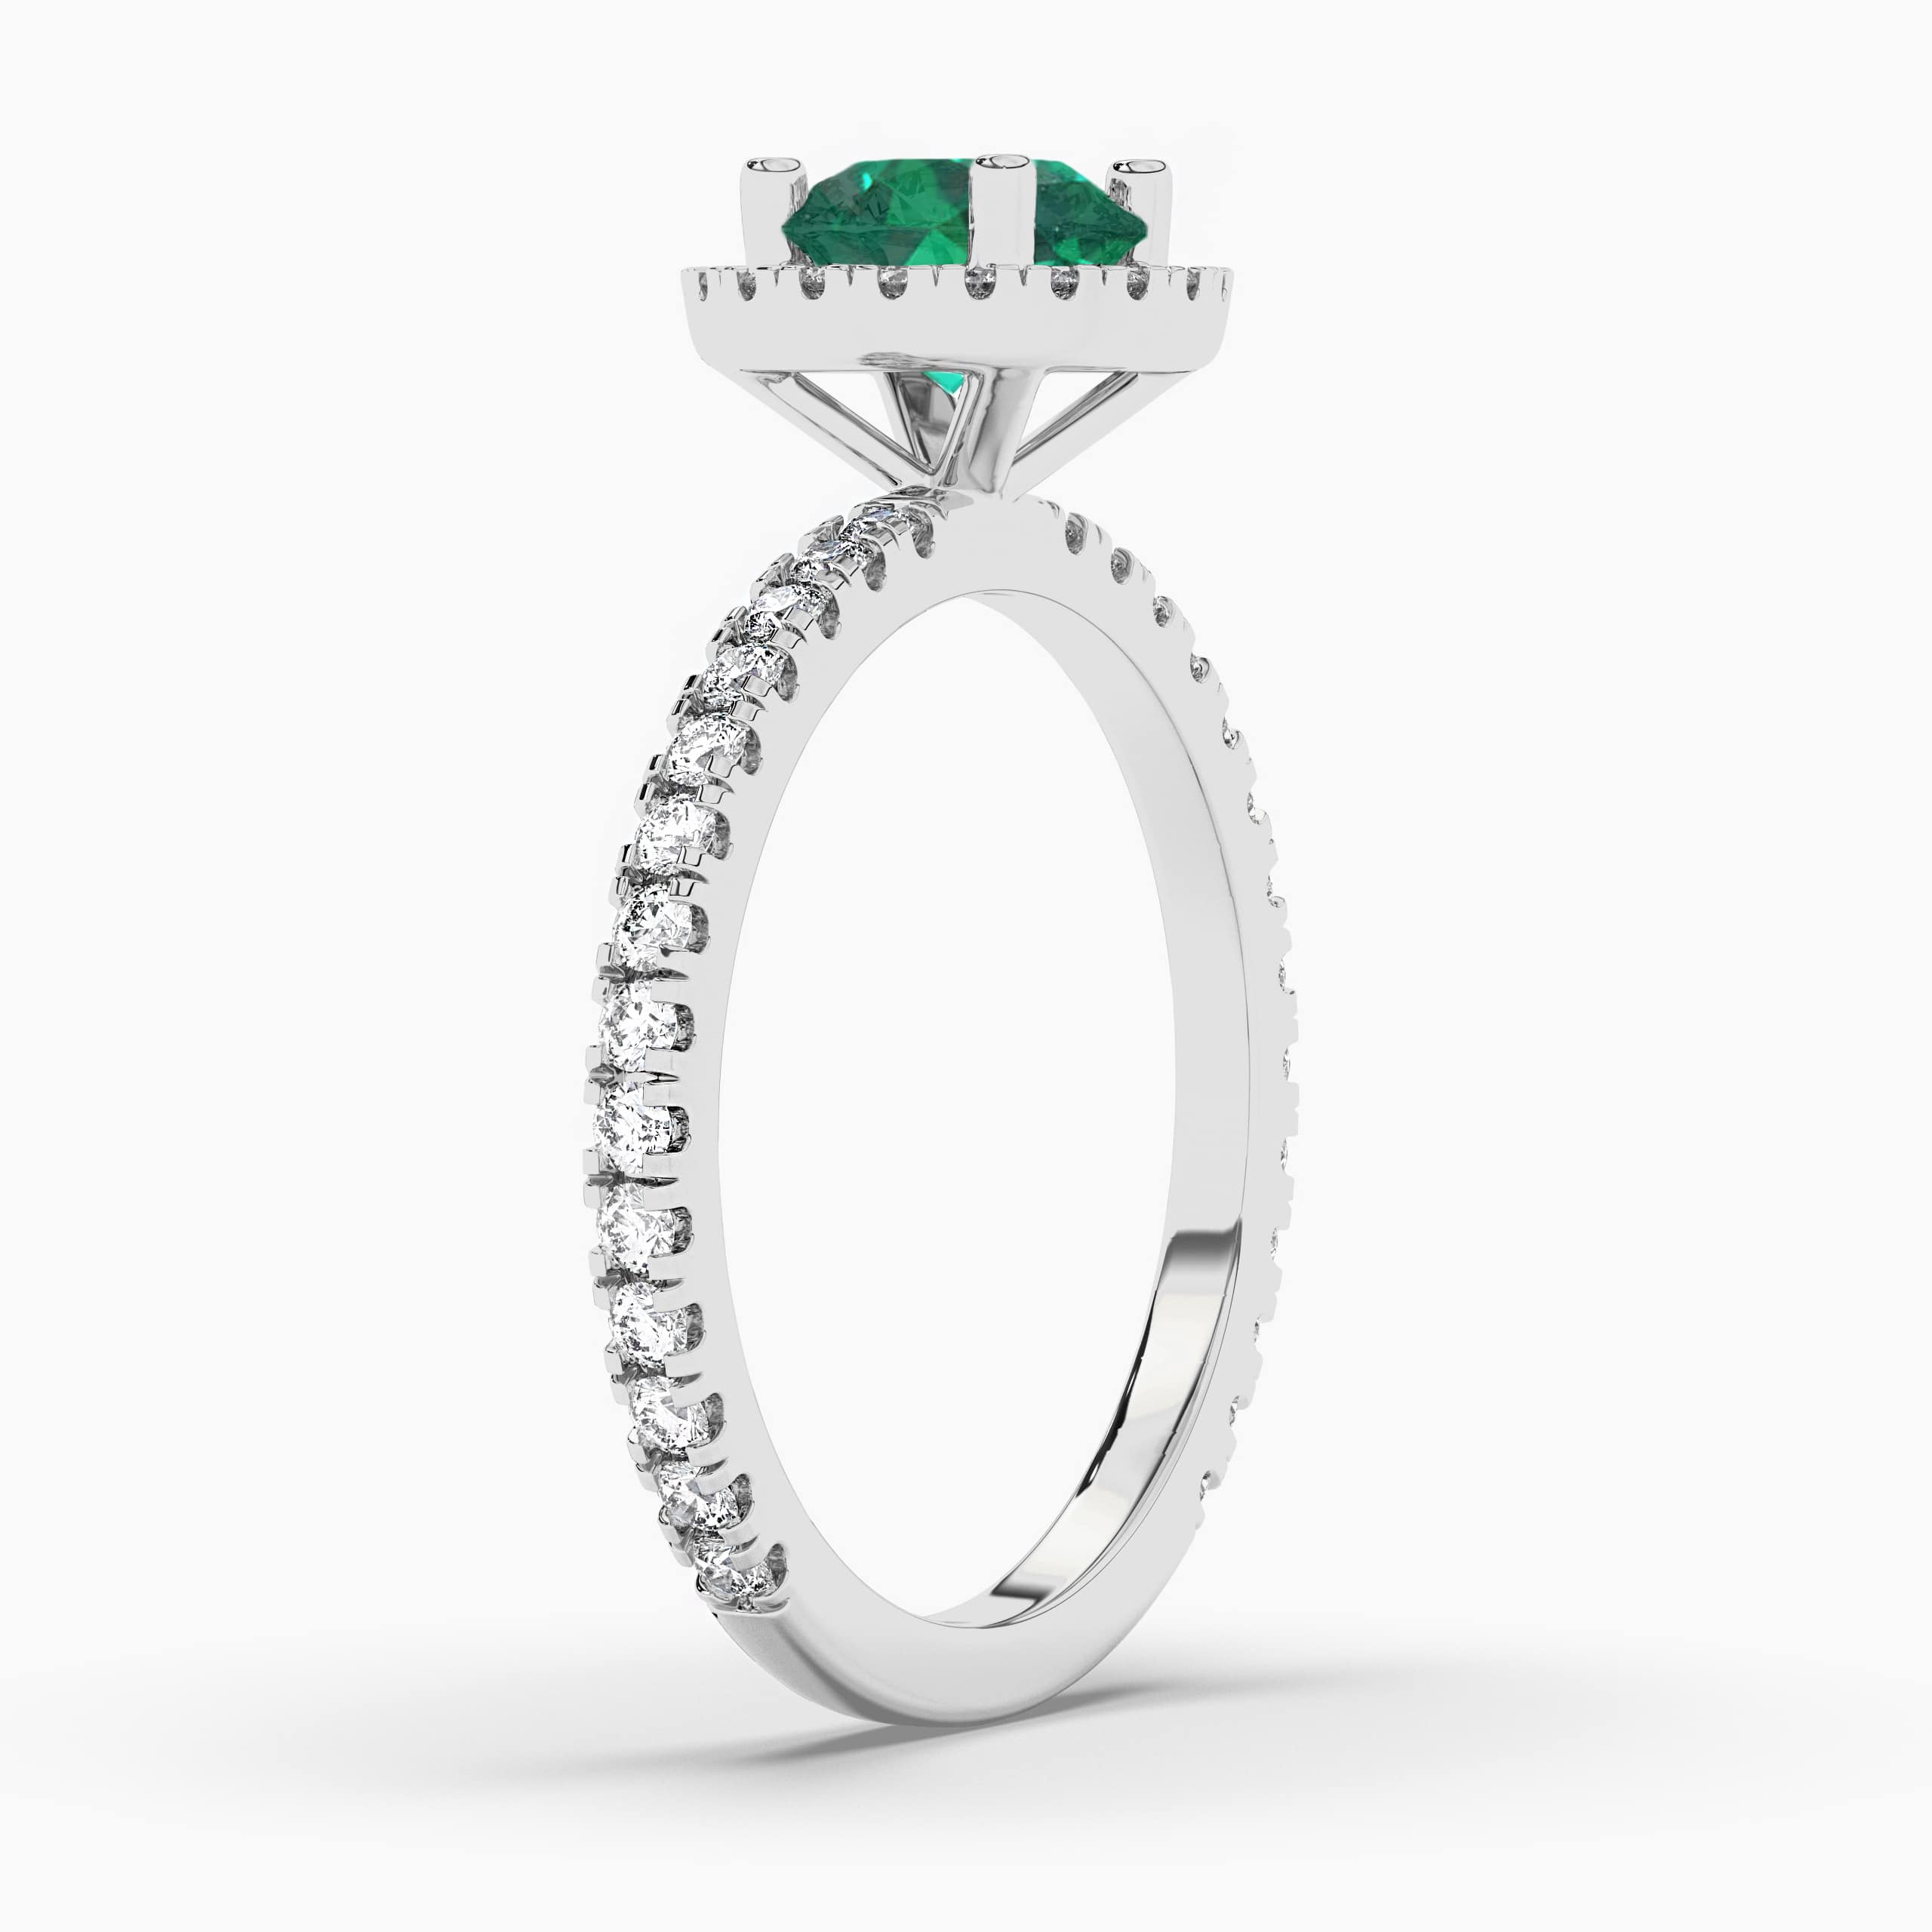 Round Cut Emerald Halo Ring, White Gold